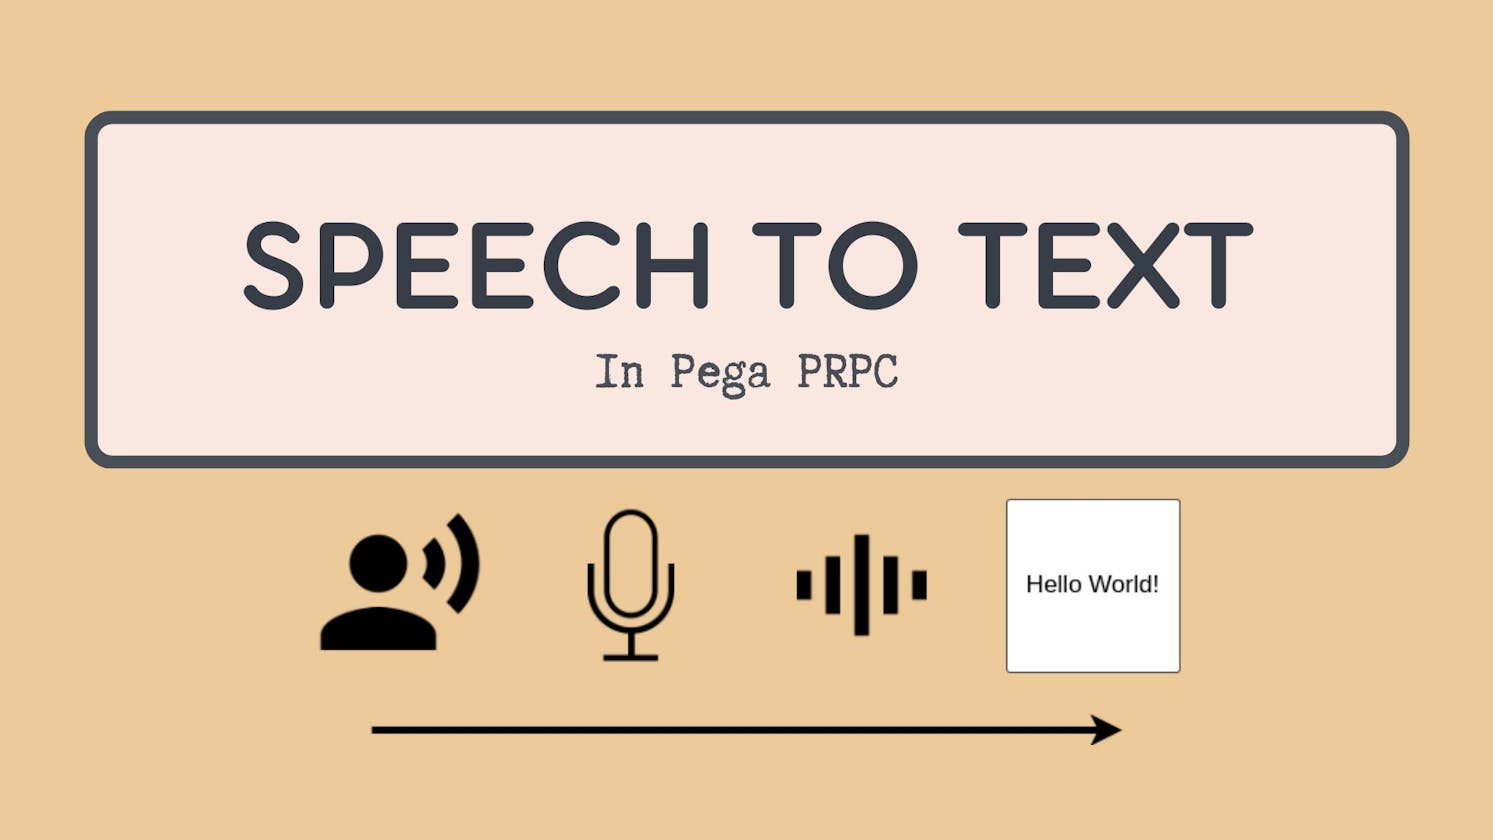 Speech to text in Pega